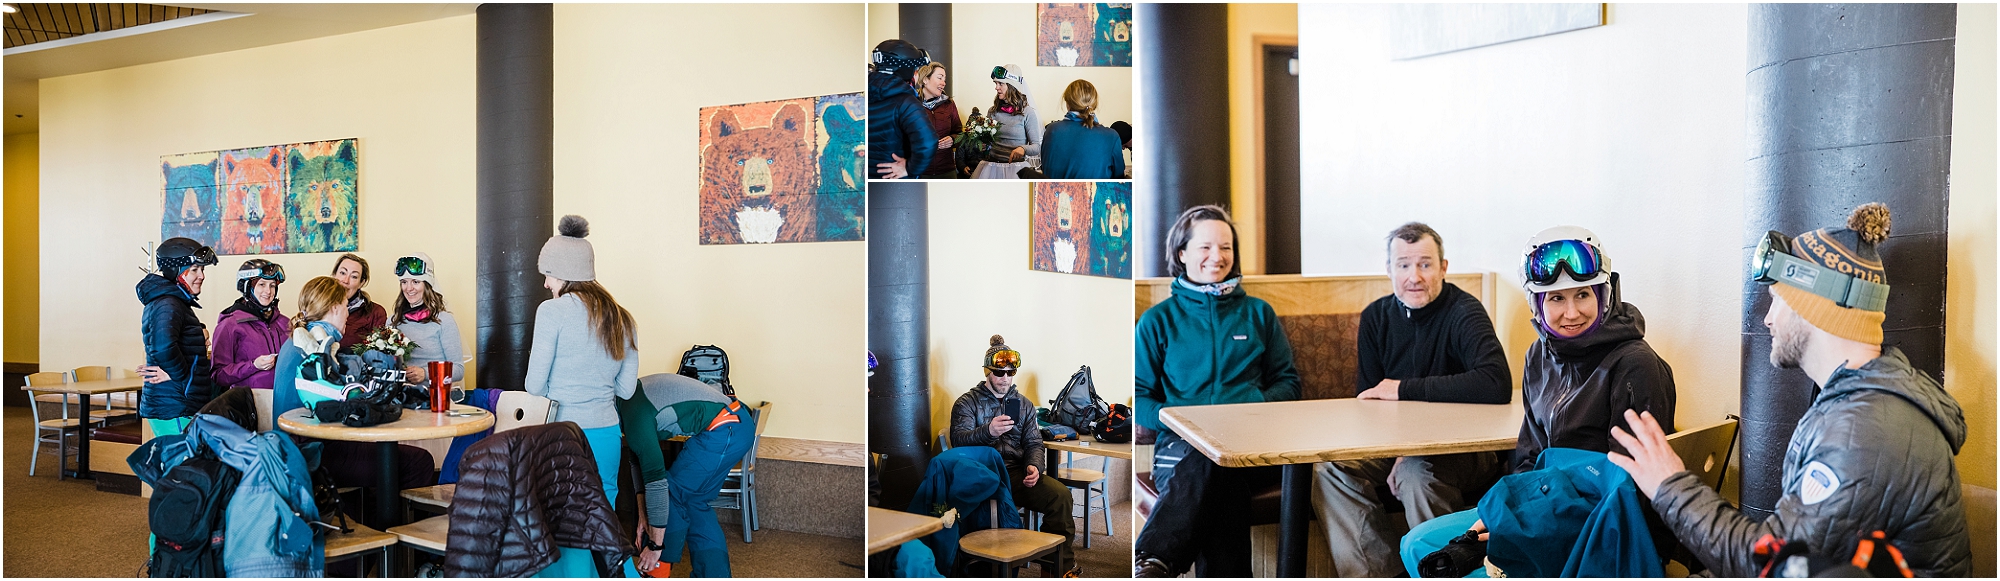 A group of skiers gathers in the lodge with the bride & groom before their Mt Bachelor adventure elopement near Bend, Oregon. | Erica Swantek Photography